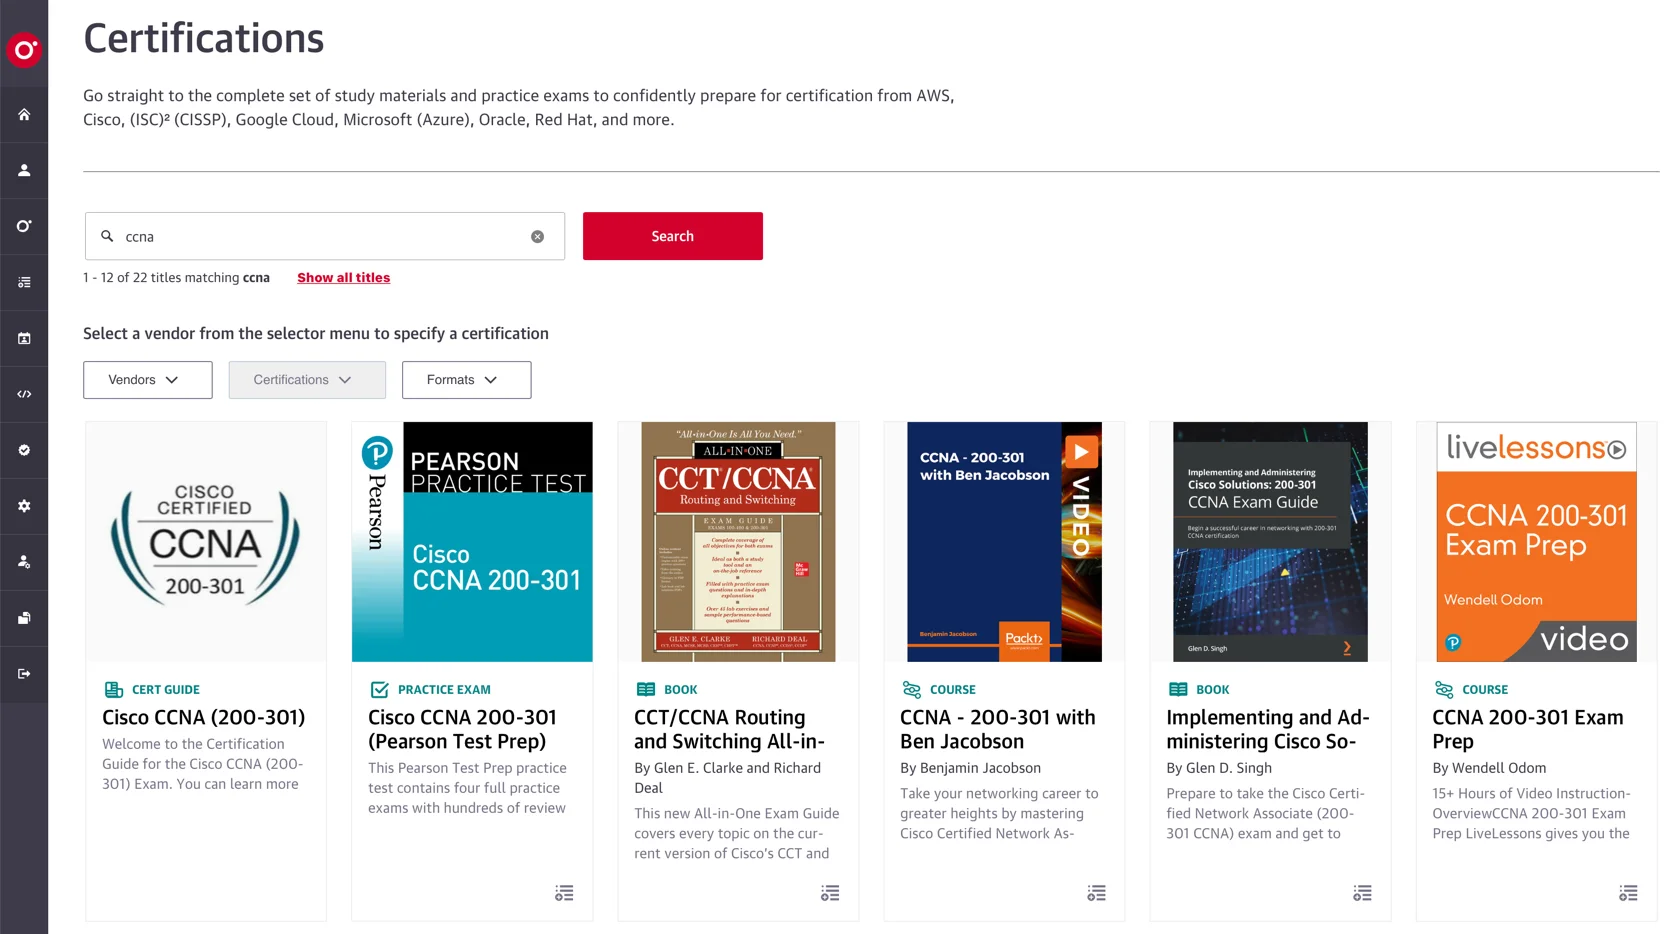 Safari Books Online (OReilly) CCNA Search under Certifications